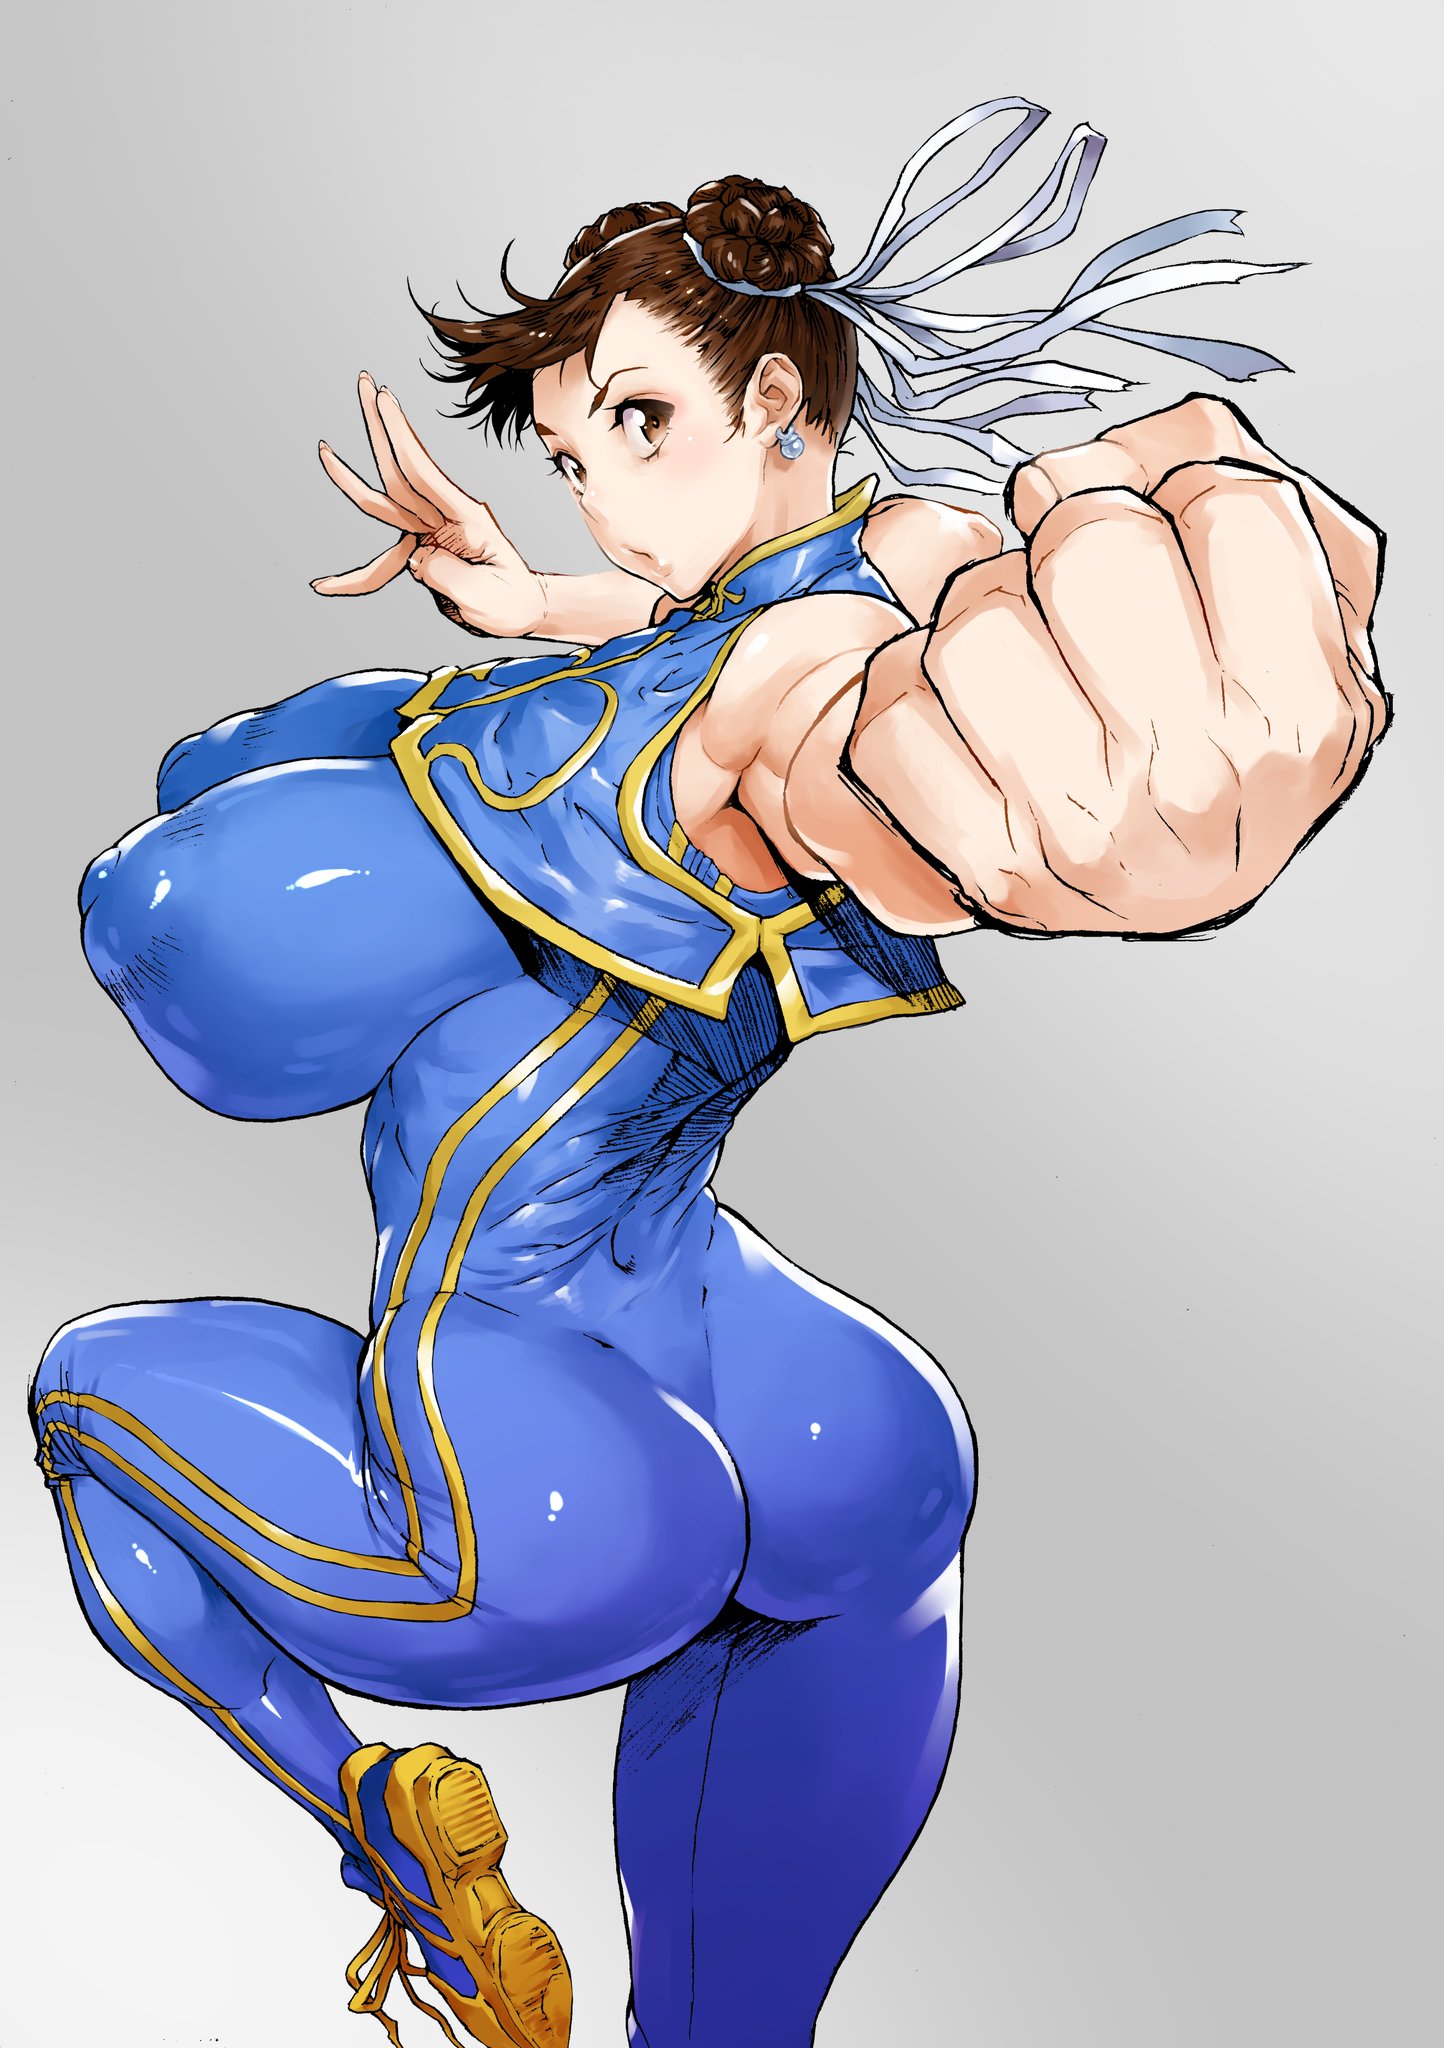 Remy, am I looking at a profile of Chunli's massive boobs or is that h...